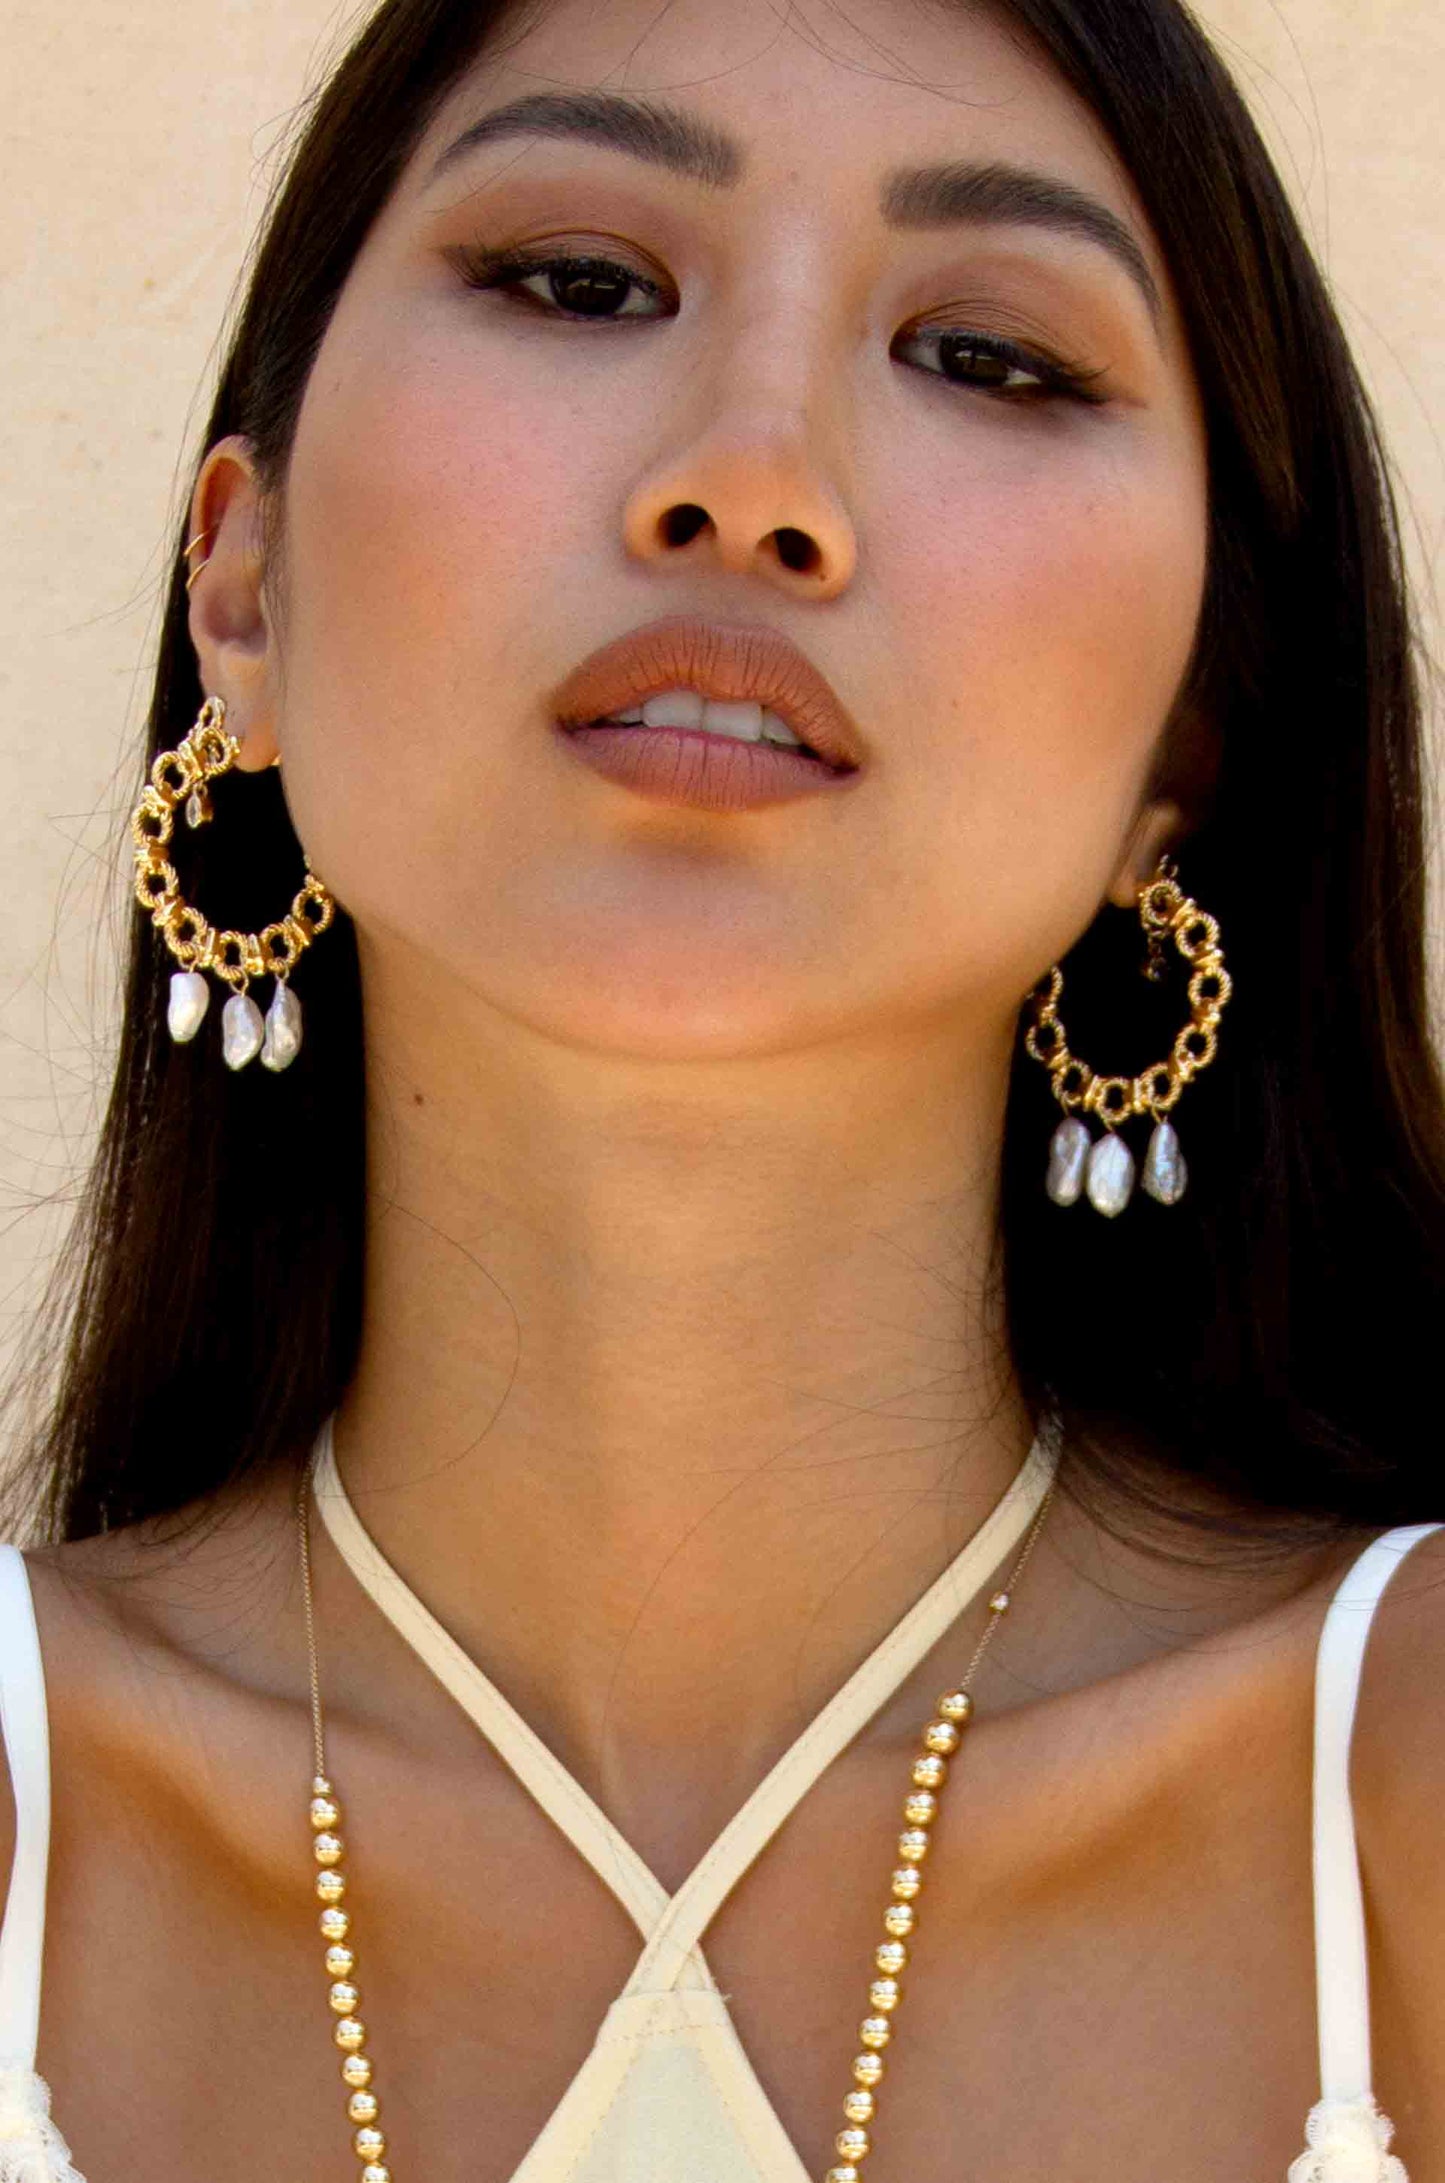 Chunky 18k Gold Plated Hoops with Freshwater Pearl Charms on a model